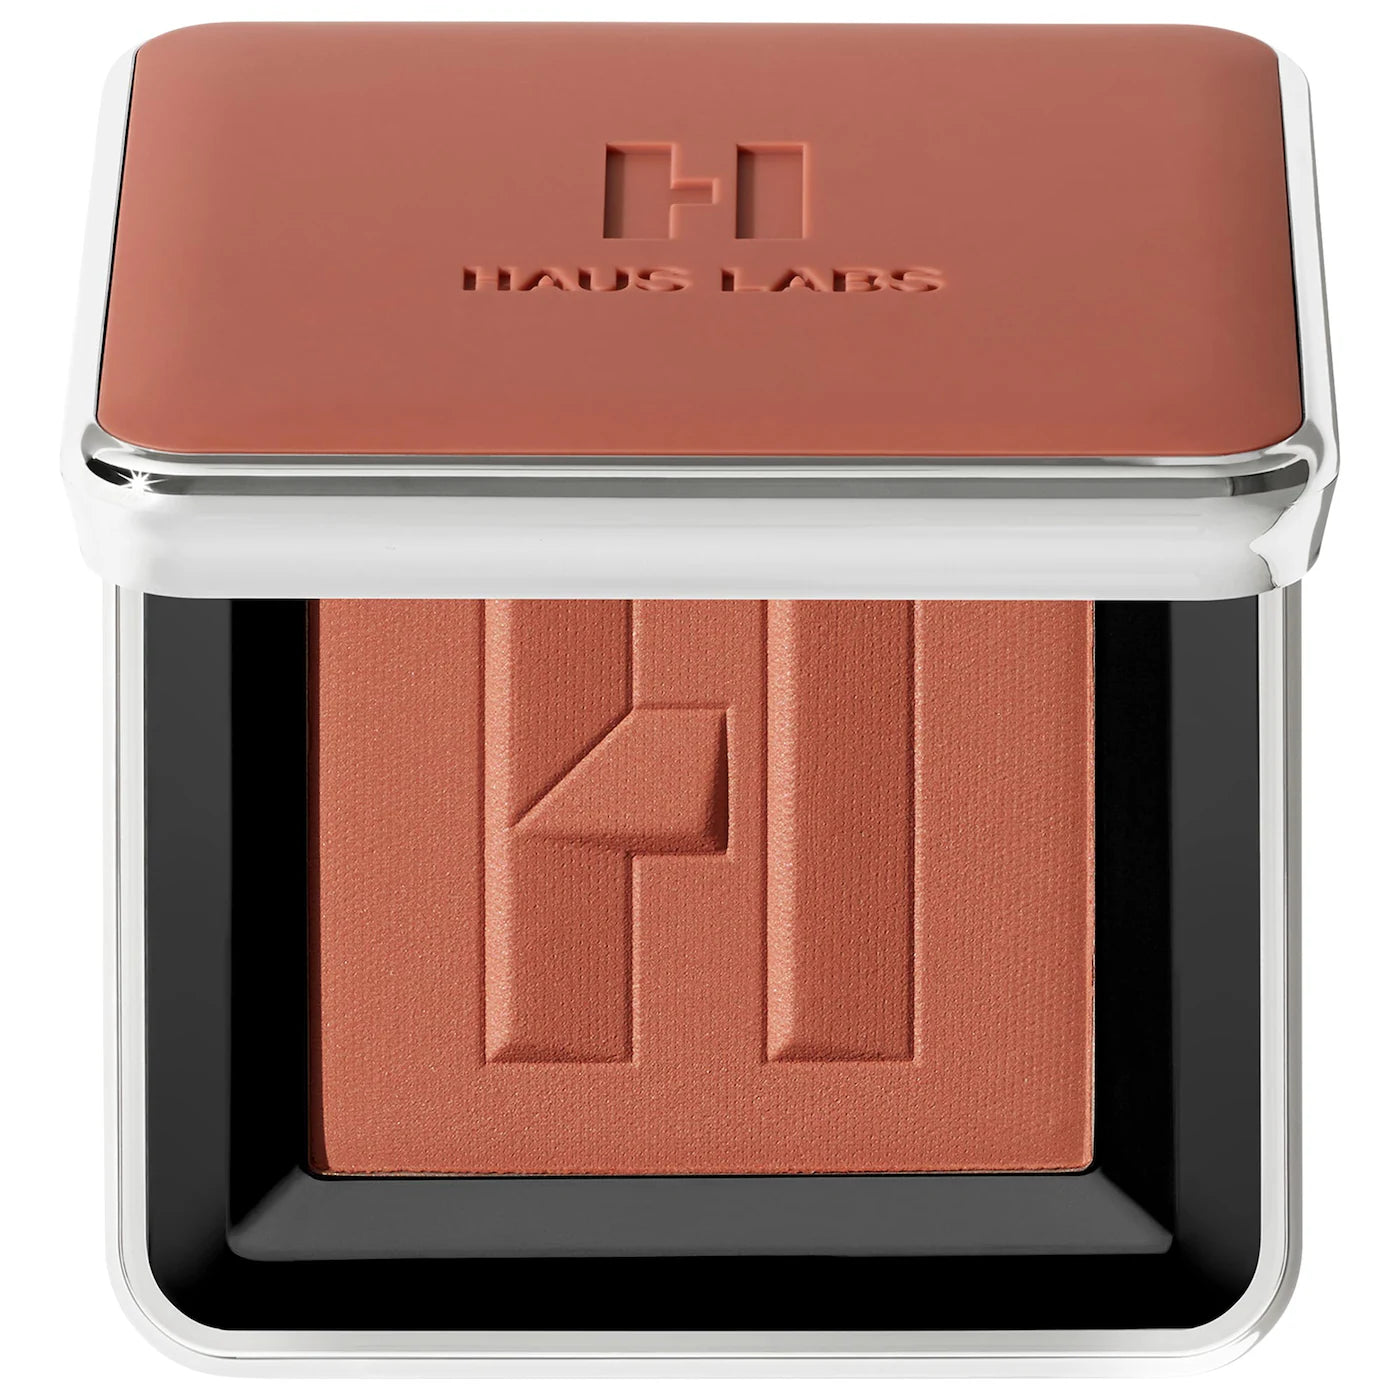 PRE-ORDEN Color Fuse Talc-Free Blush Powder With Fermented Arnica| HAUS LABS